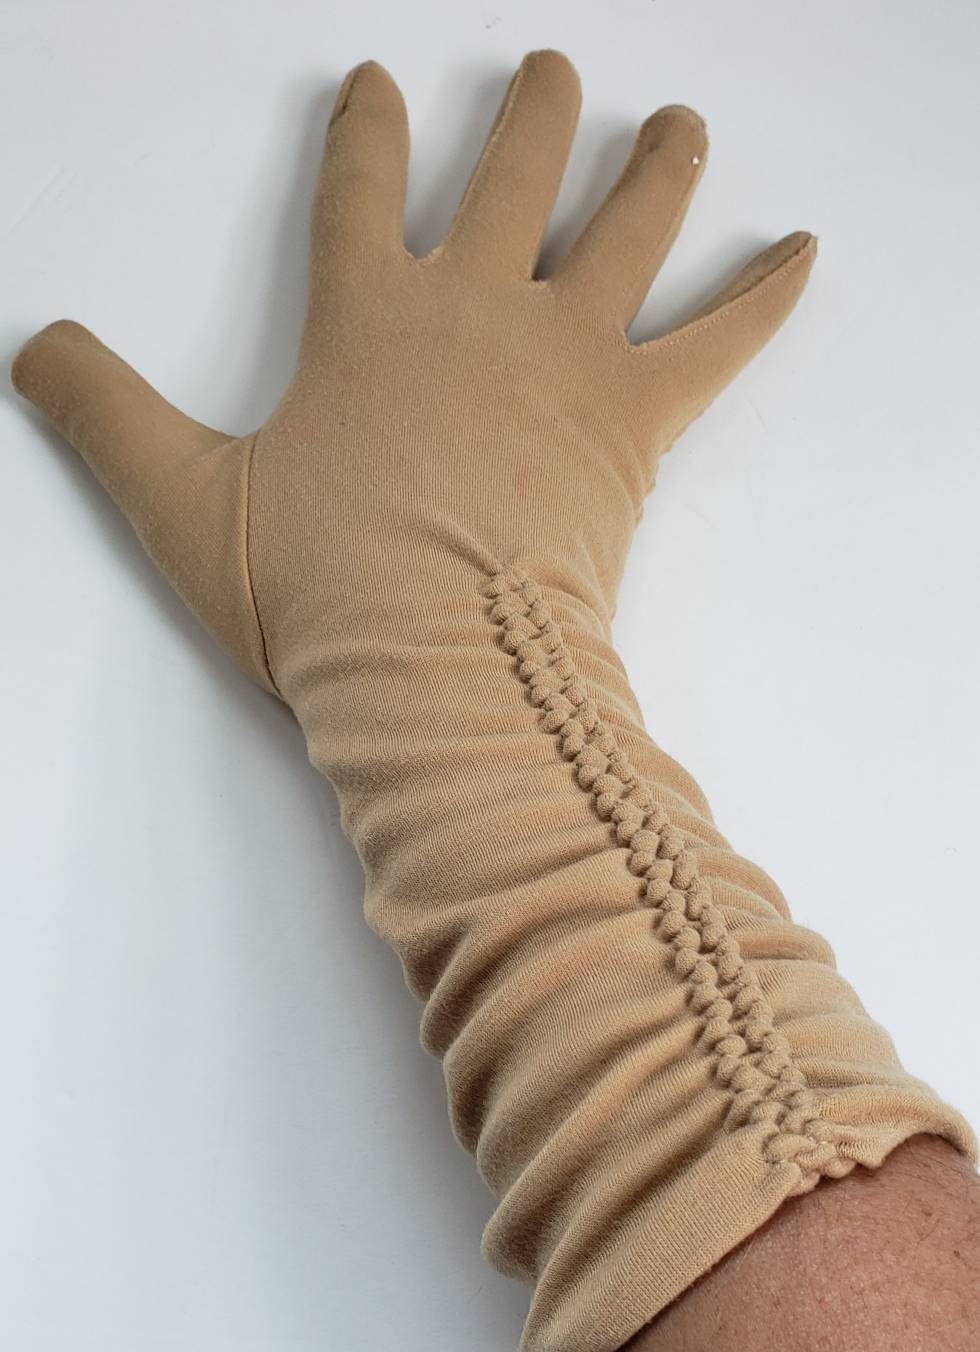 1950s Beige Gloves Ruched Elastic Design / 50s Three Quarters Length Day Gloves Light Tan / Jacqui